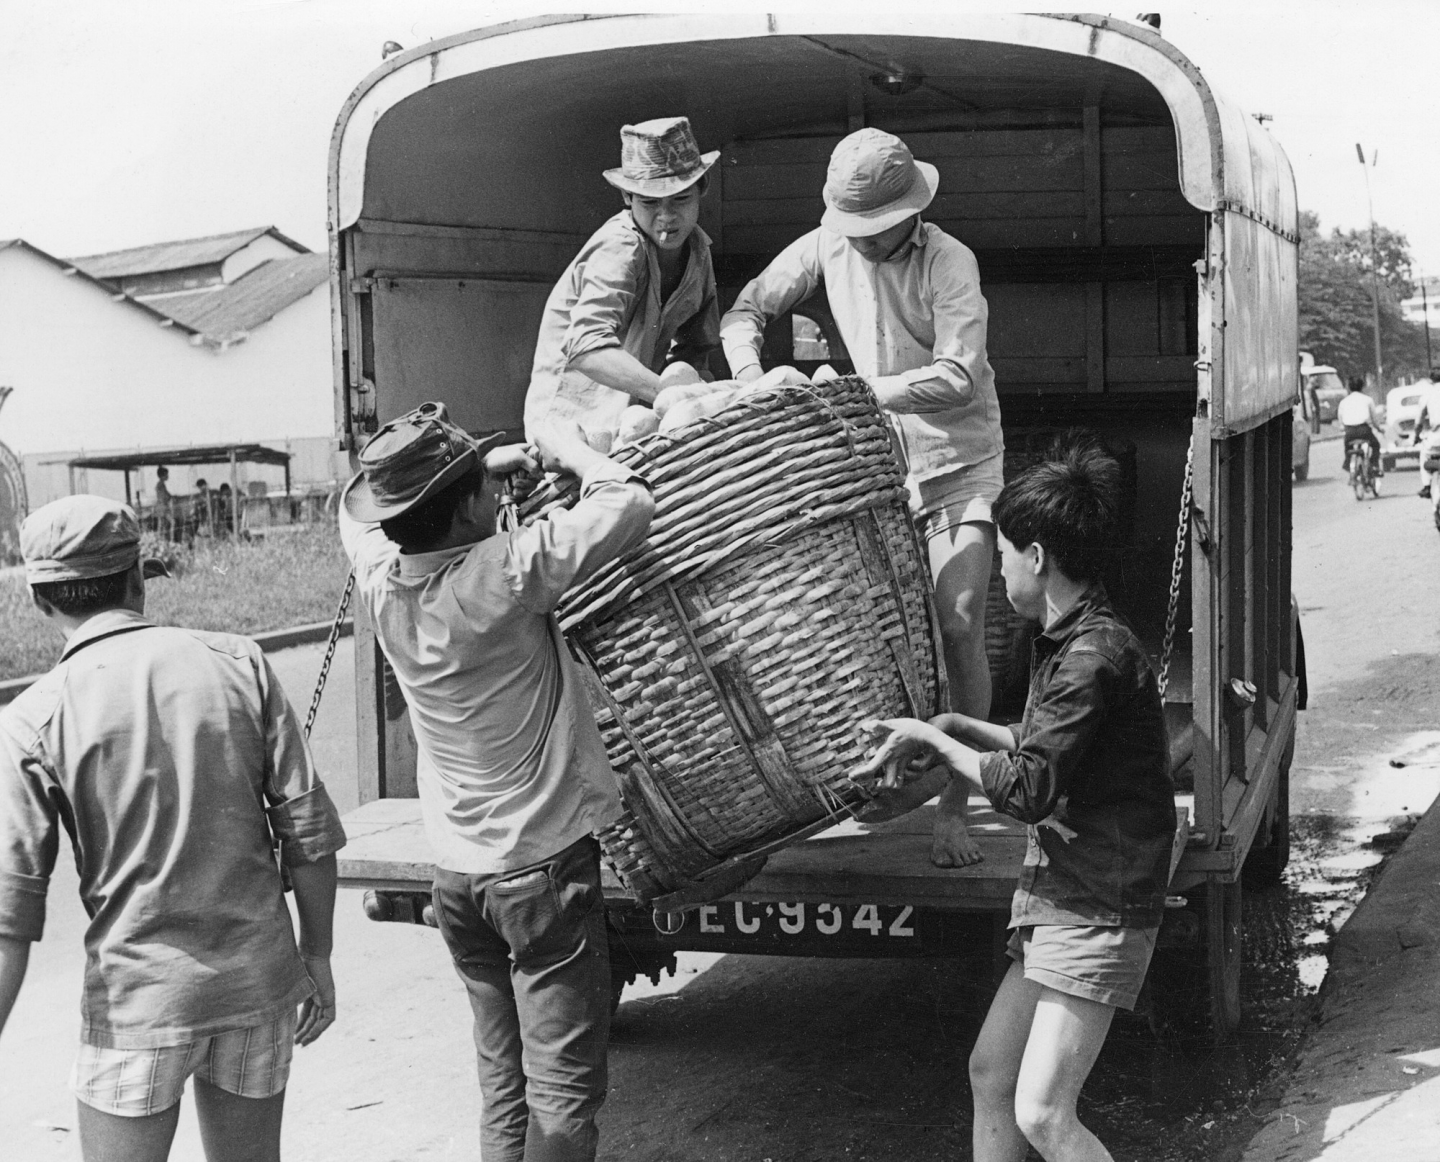 A black and white photo from the 1960s of men loading a large basket into a back of a truck in Vietnam